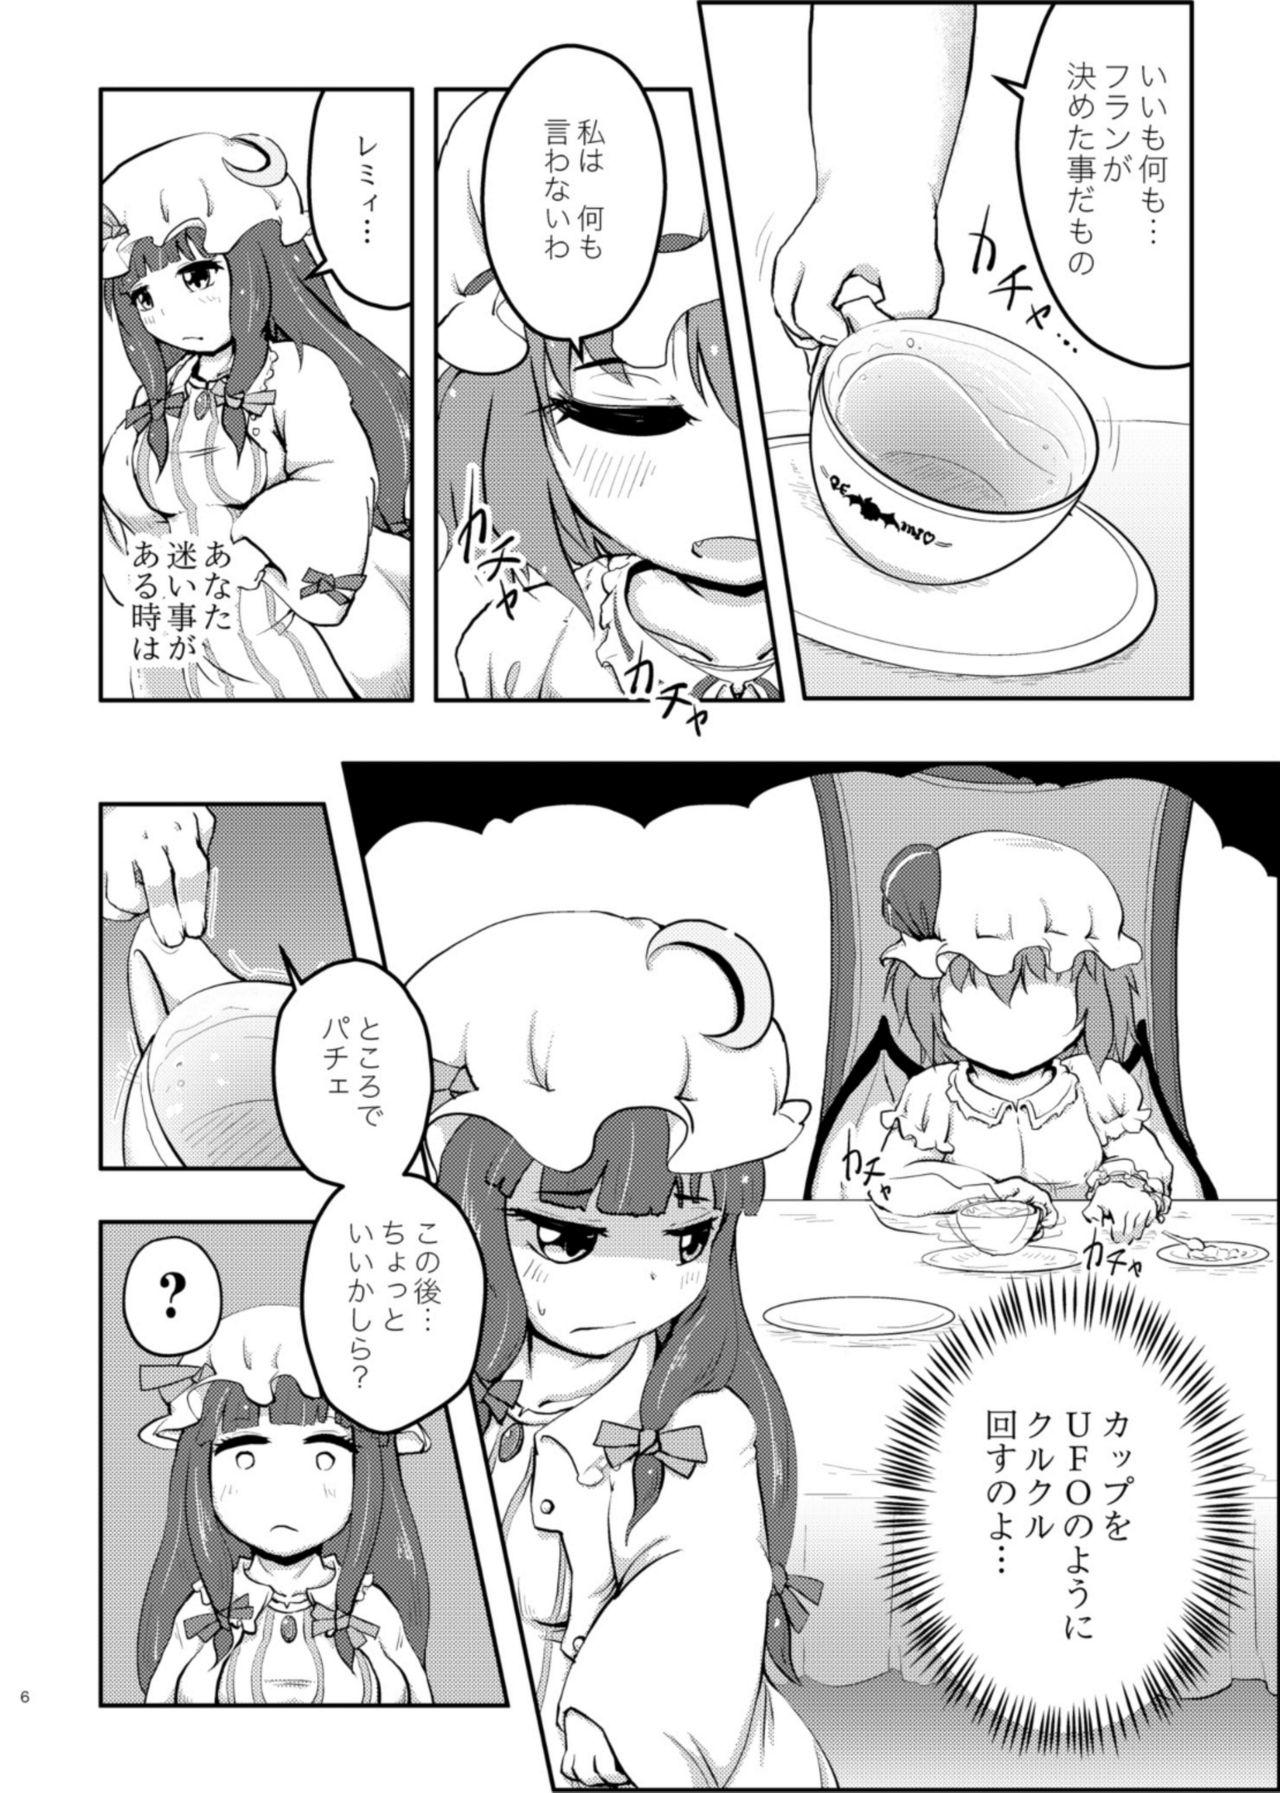 Balls Scarlet Conflict 2 - Touhou project Pija - Page 6